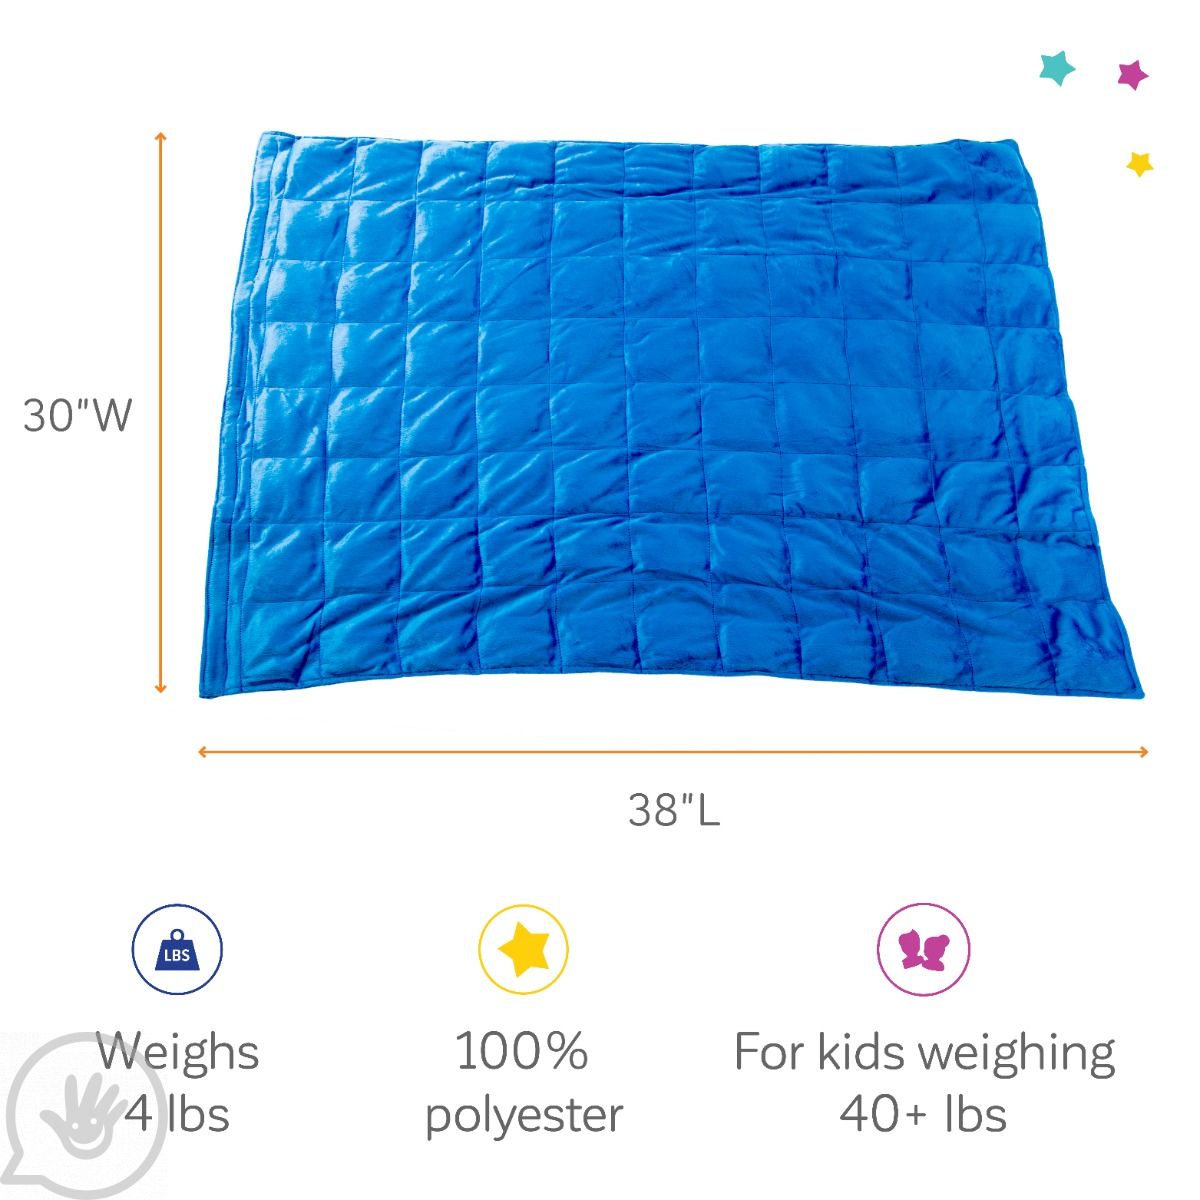 Soft Plush Weighted Blanket